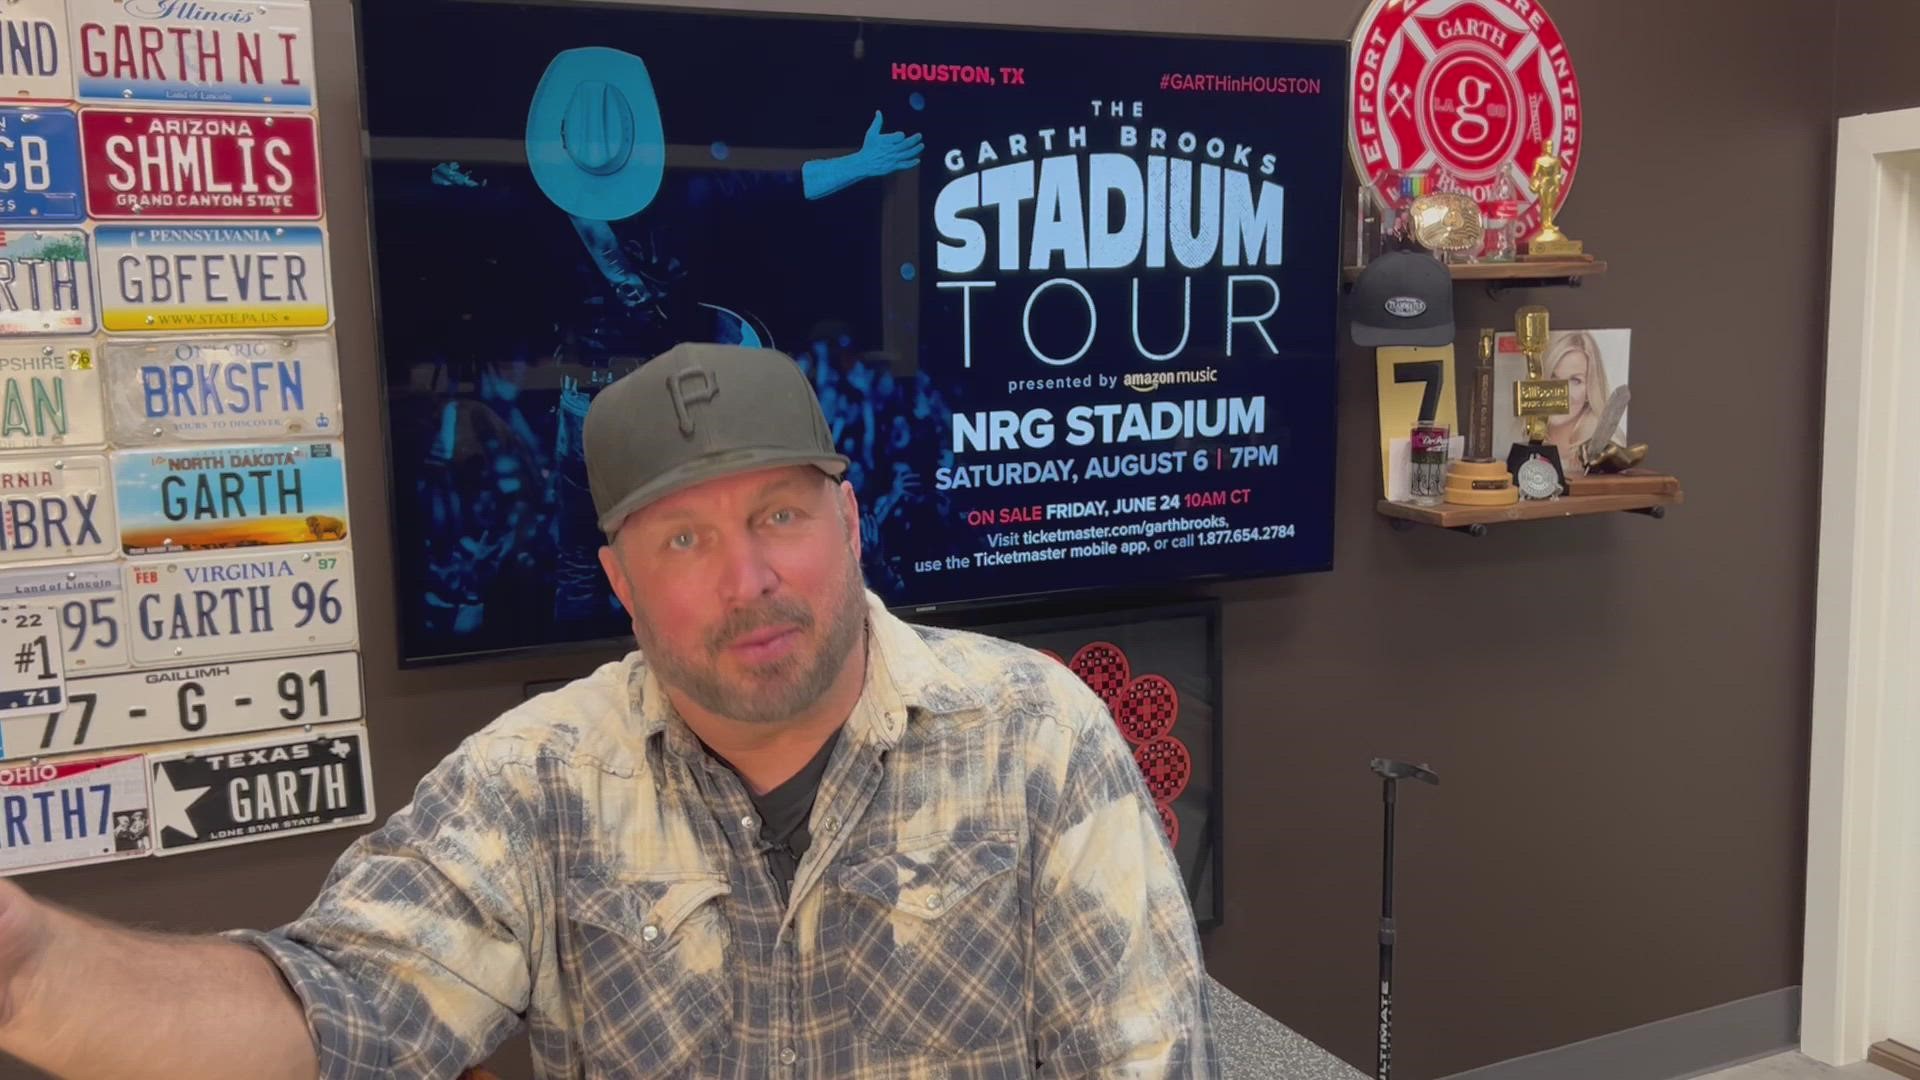 Brooks called it "poetic justice" that he's ending his stadium tour at NRG in August. He explains why.